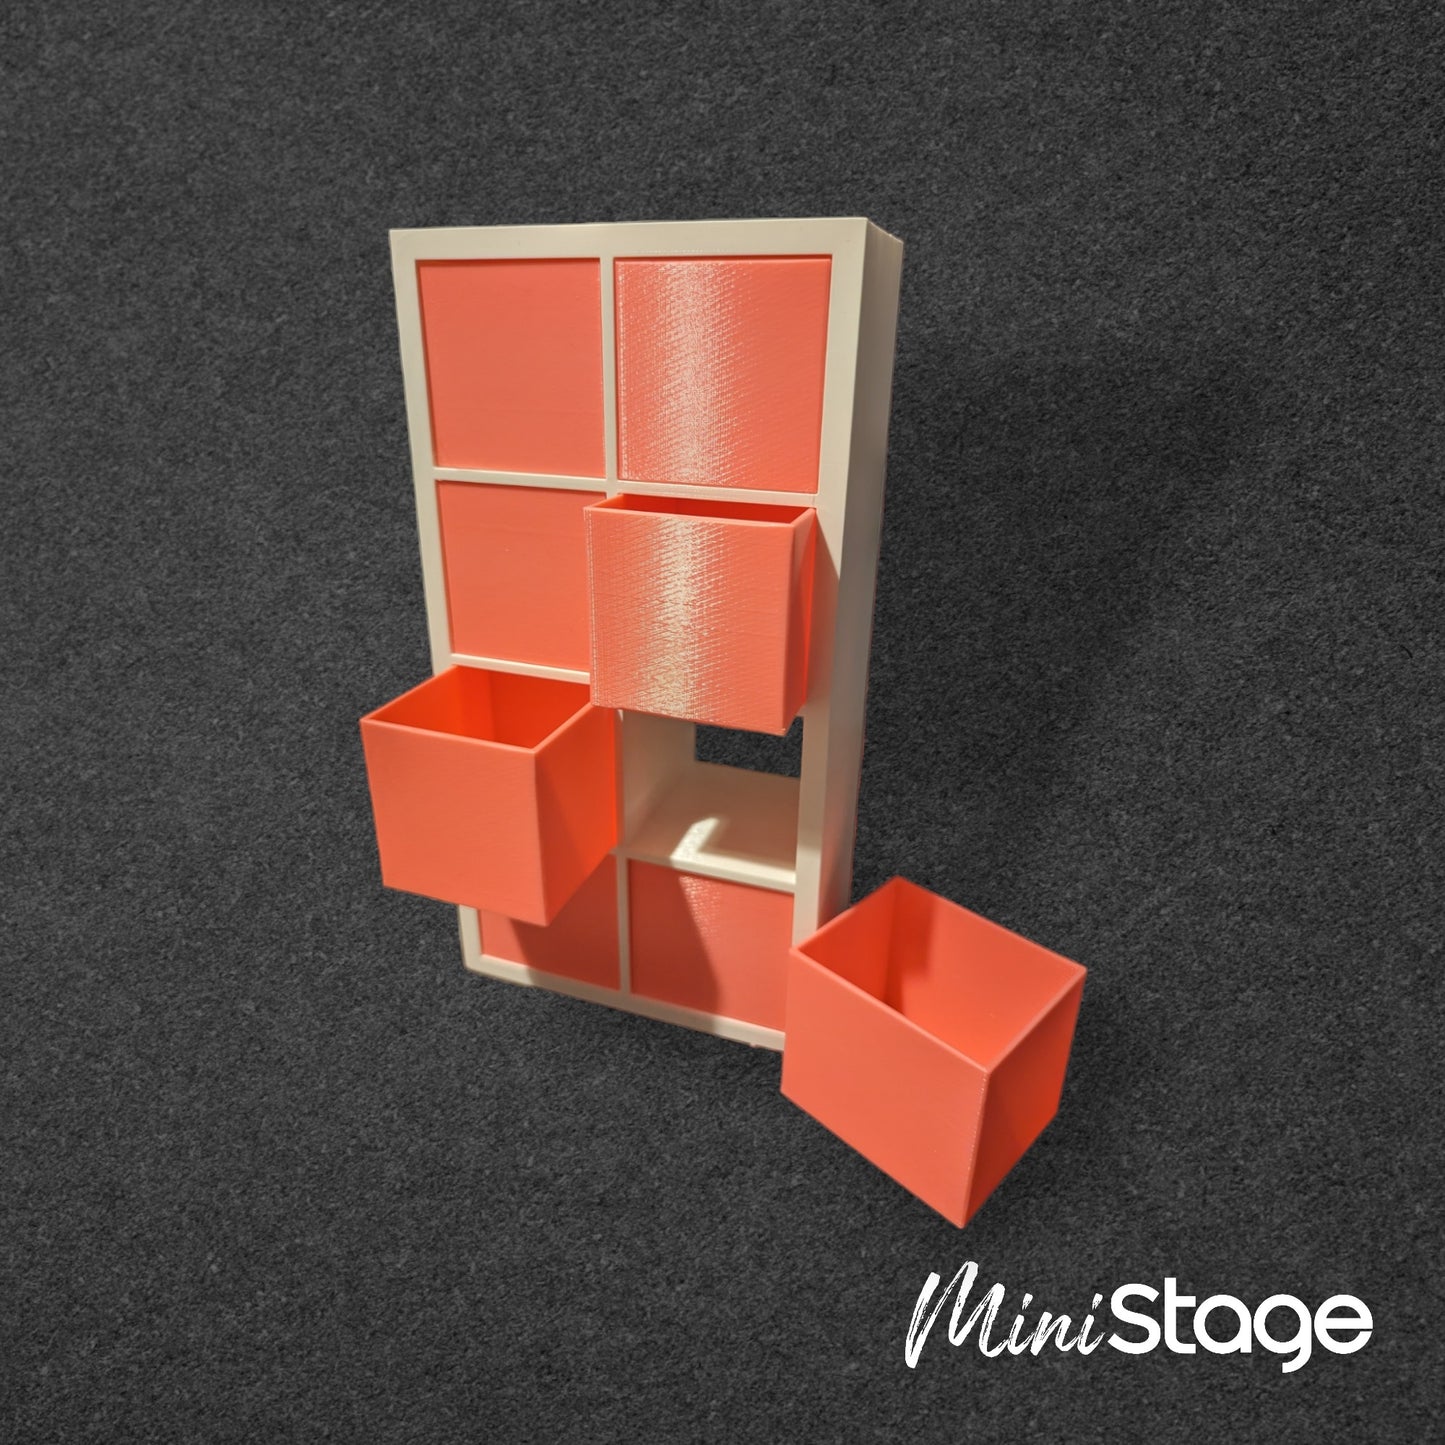 Scale Model of a Square Shelving Unit (Based on Kallax)